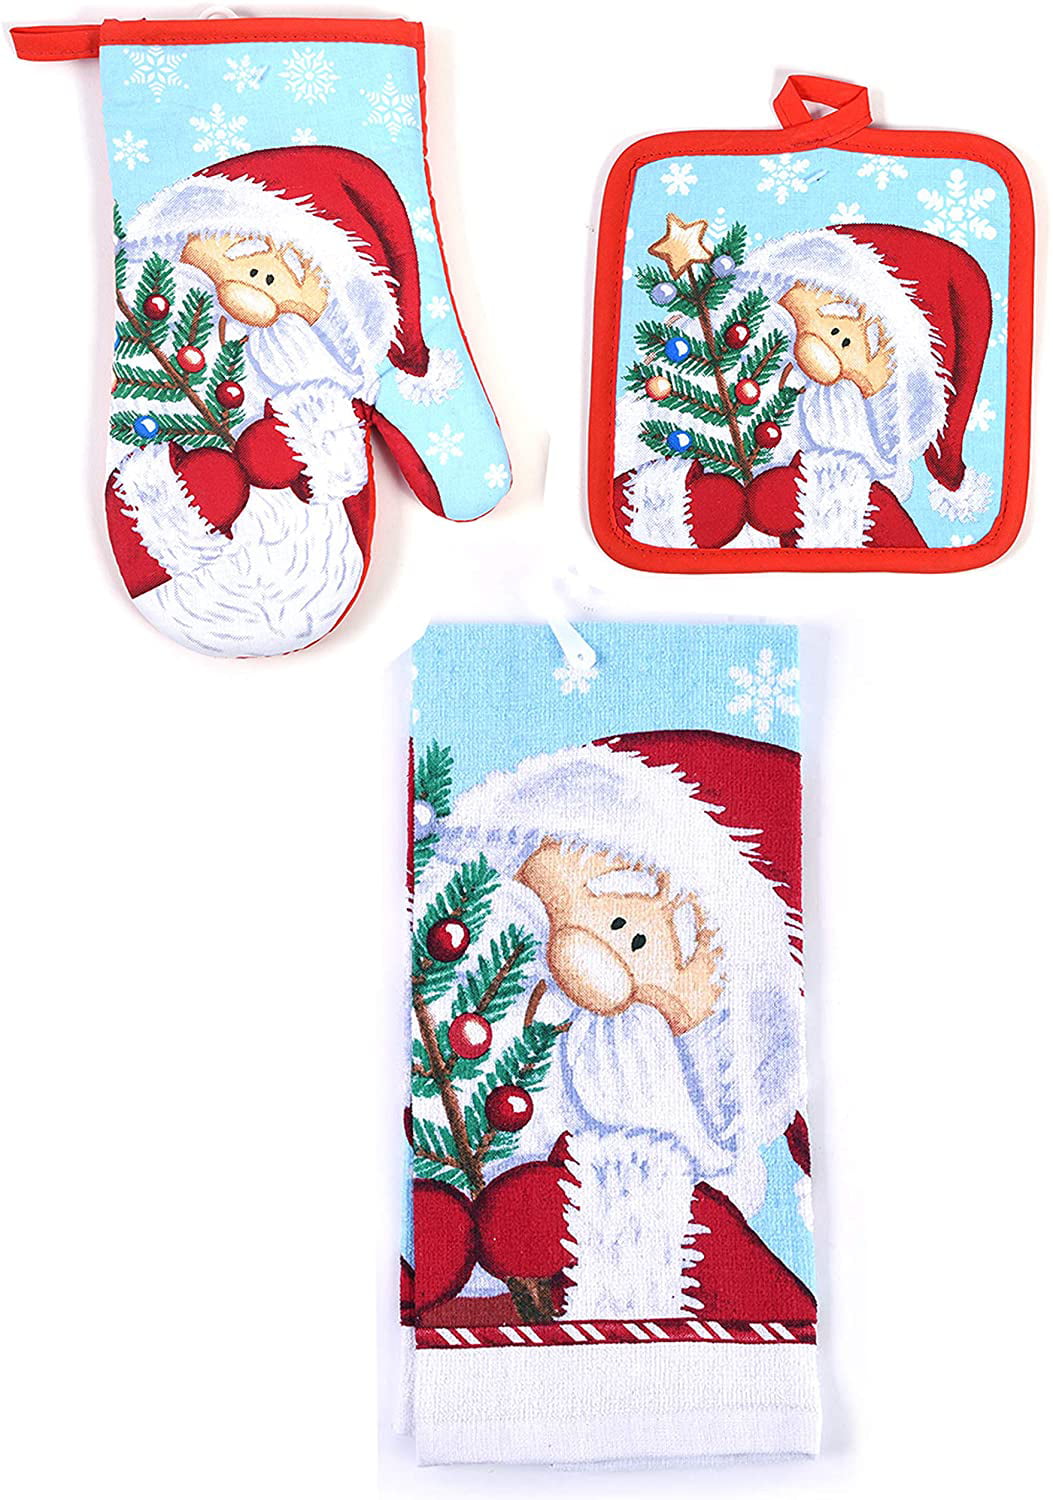 Set of 4 Items Christmas Holiday Snowman 2 Kitchen Towels and 2 Oven Mitts